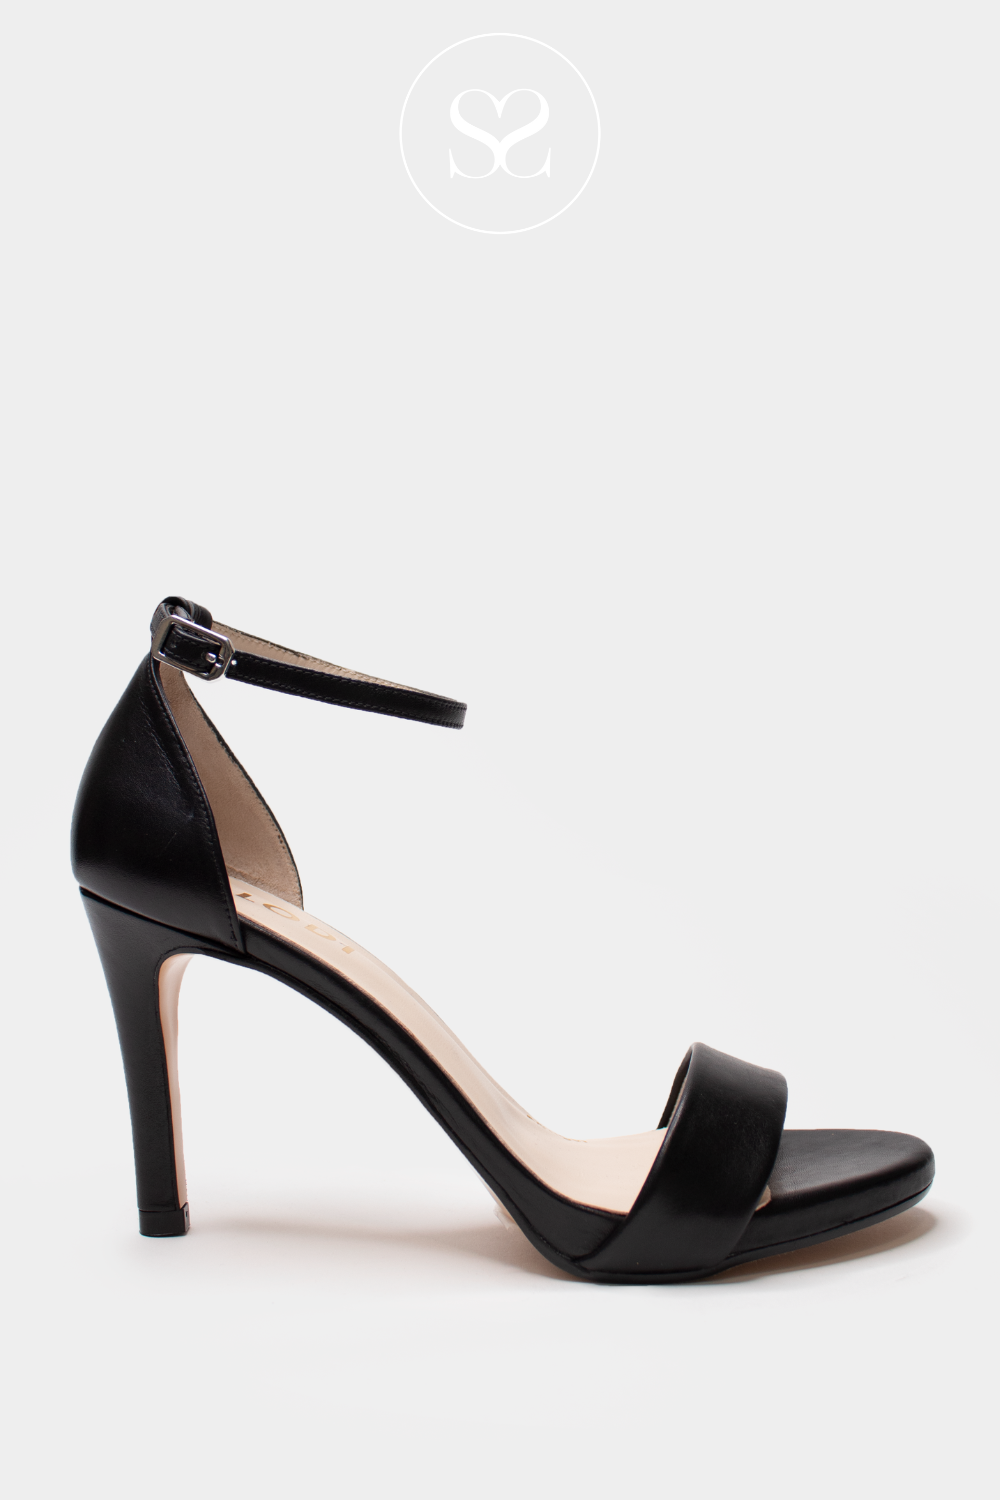 Barely There High Heel Sandals - Beige or Black - Just $4